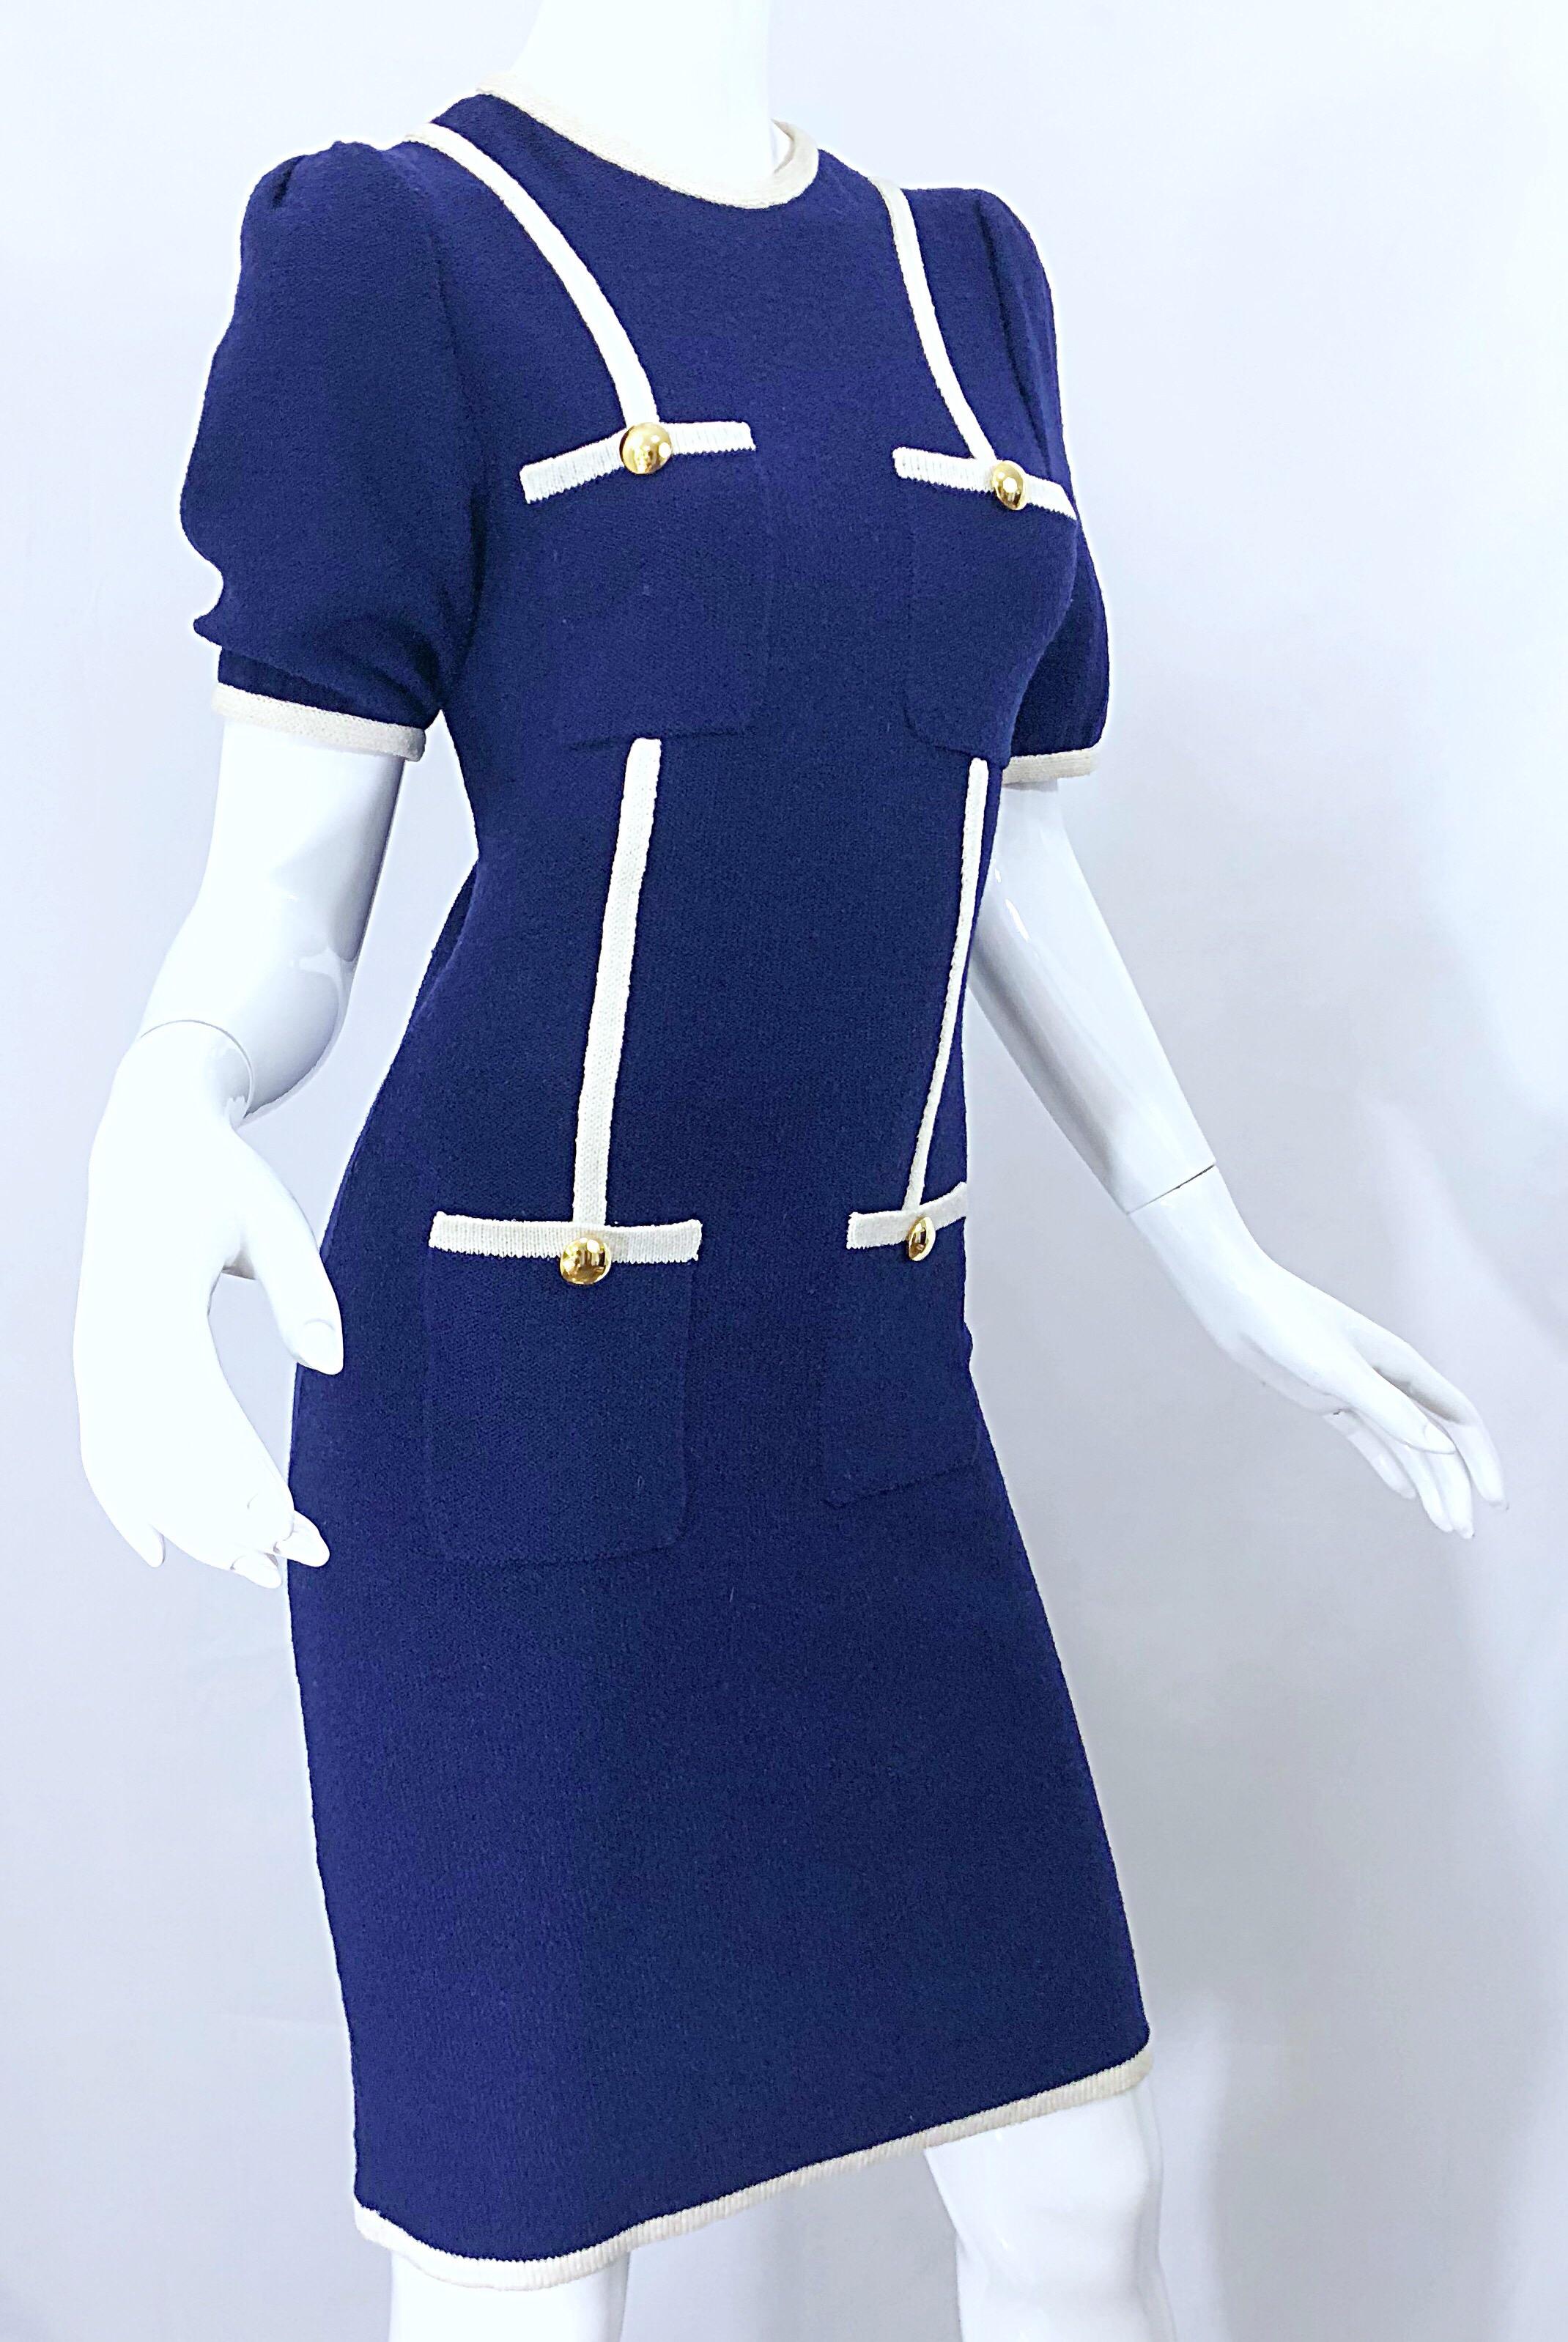 Vintage Adolfo for Saks 5th Avenue Navy Blue and White Nautical Knit Dress 4